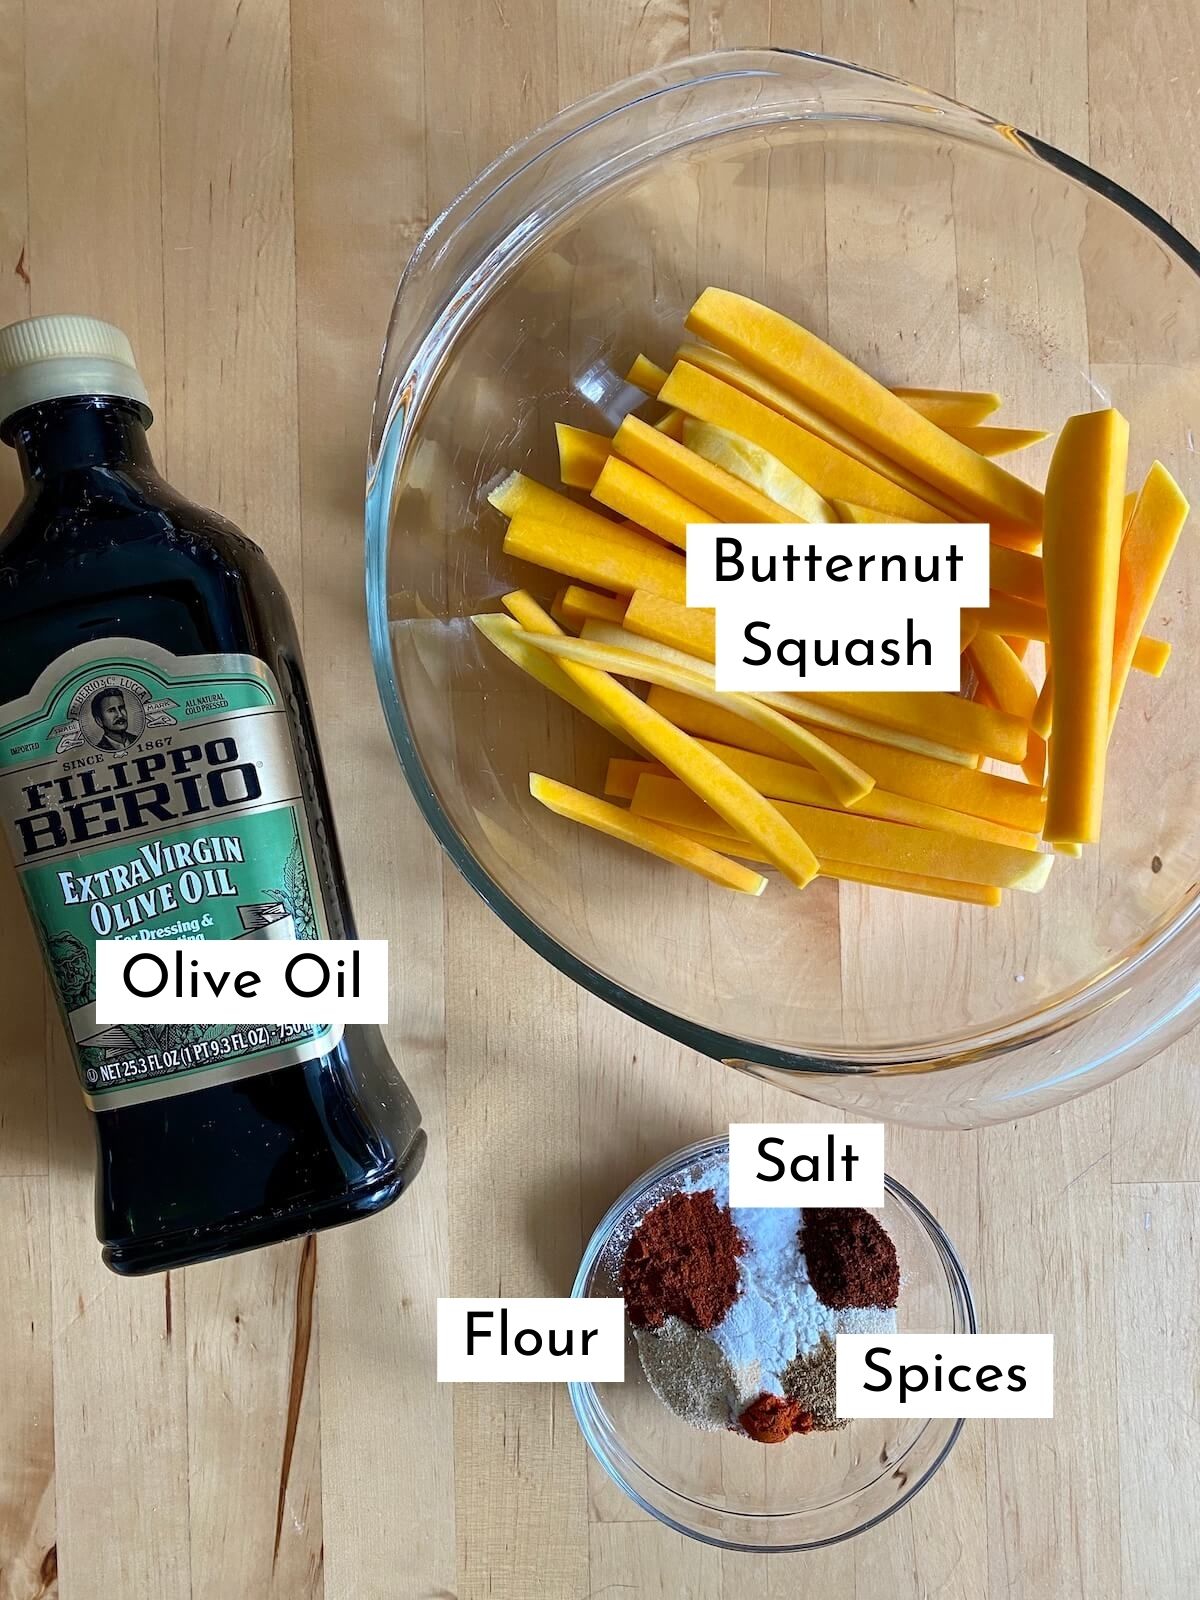 The ingredients to make air fryer butternut squash fries on a wooden counter. There is text over each ingredients, labeling what it is. The ingredients include olive oil, butternut squash, flour, salt, and spices.